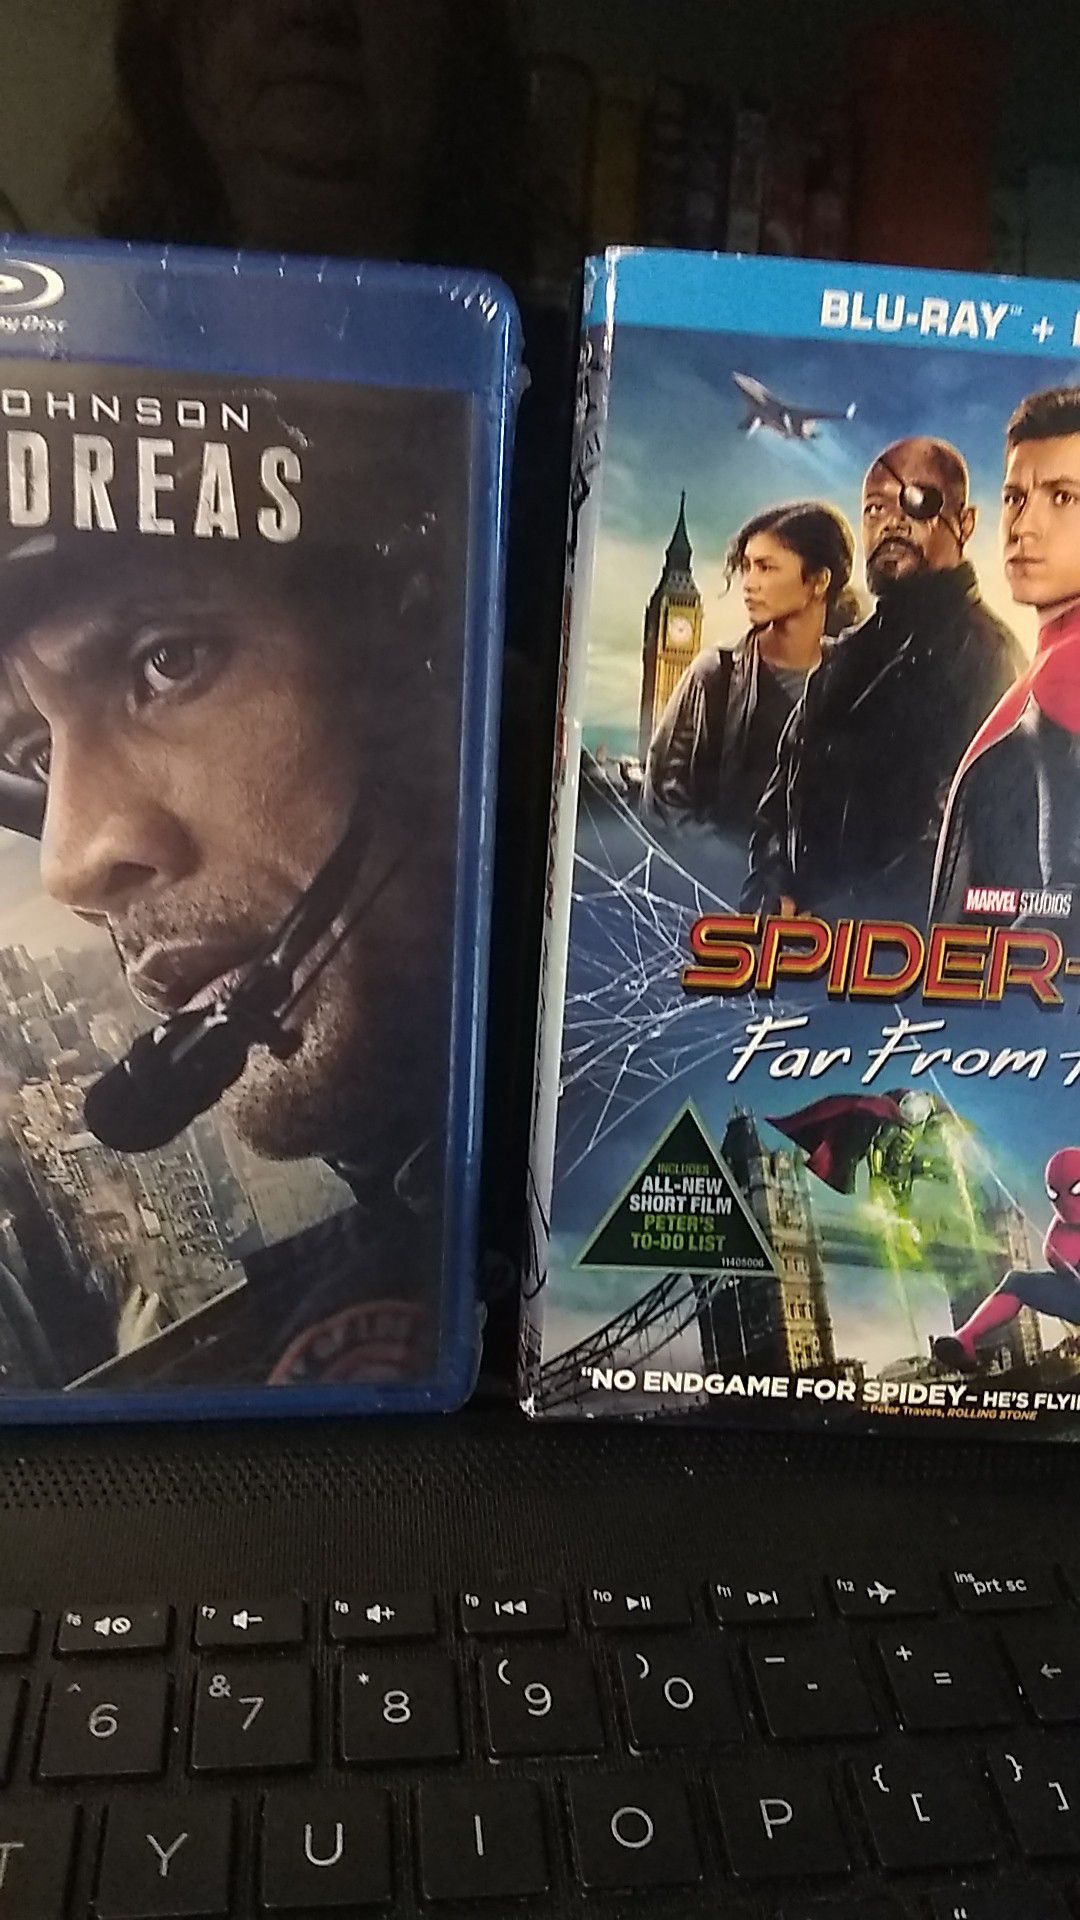 Brand new blu-ray Spider-Man and San Andreas